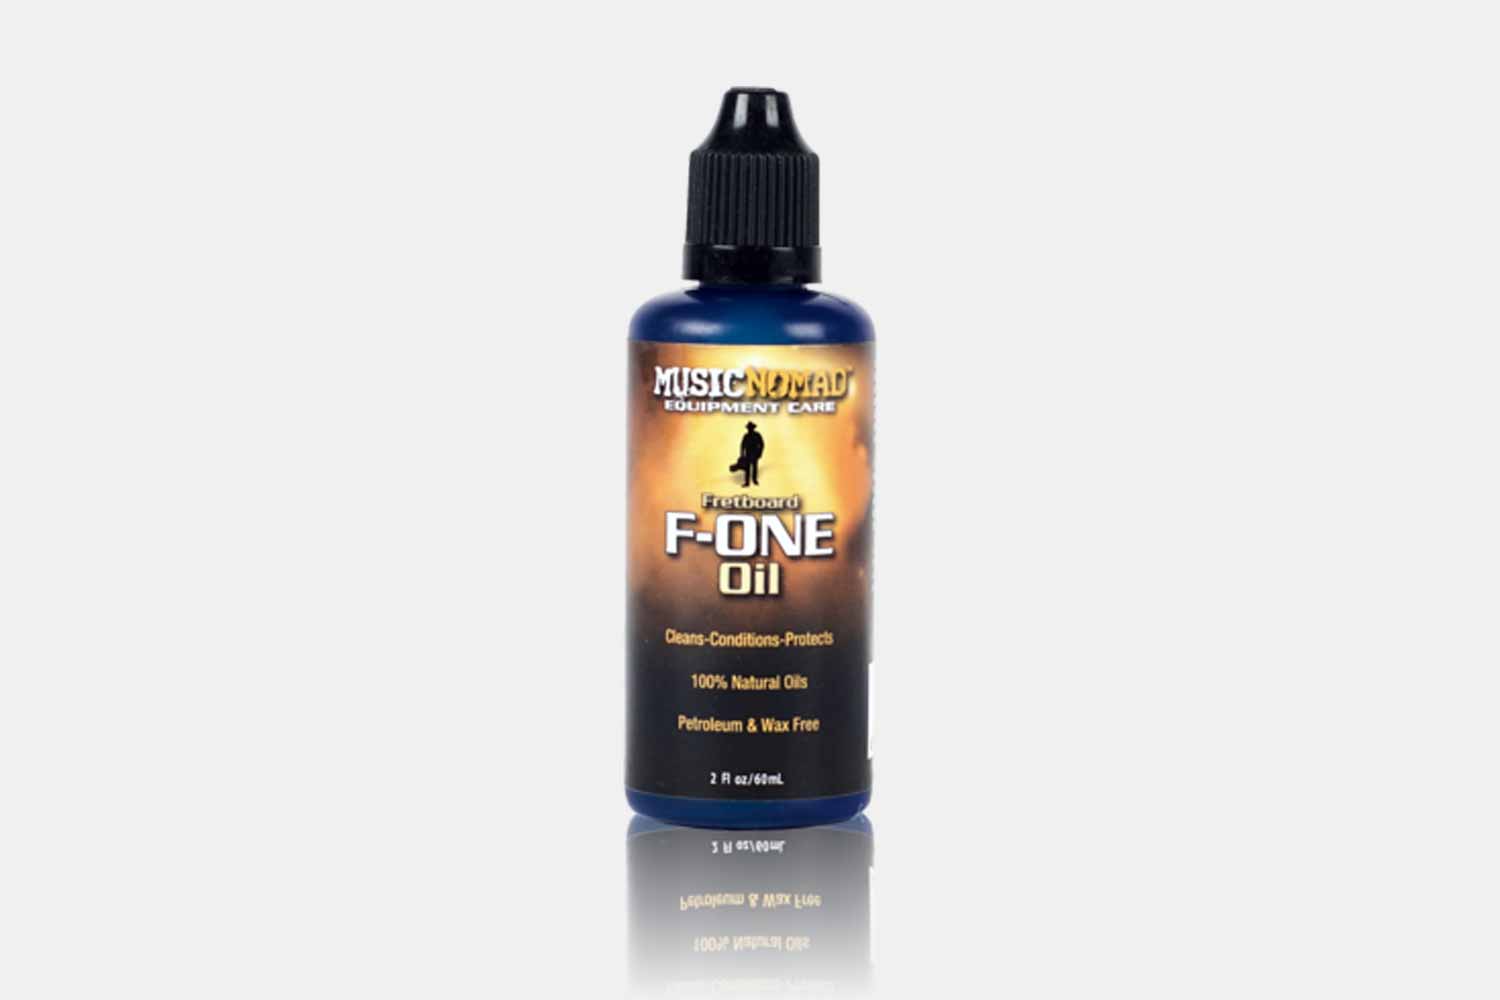 Music Nomad Fretboard F-ONE Oil - Cleaner & Conditioner - MN105 (5482107764900)